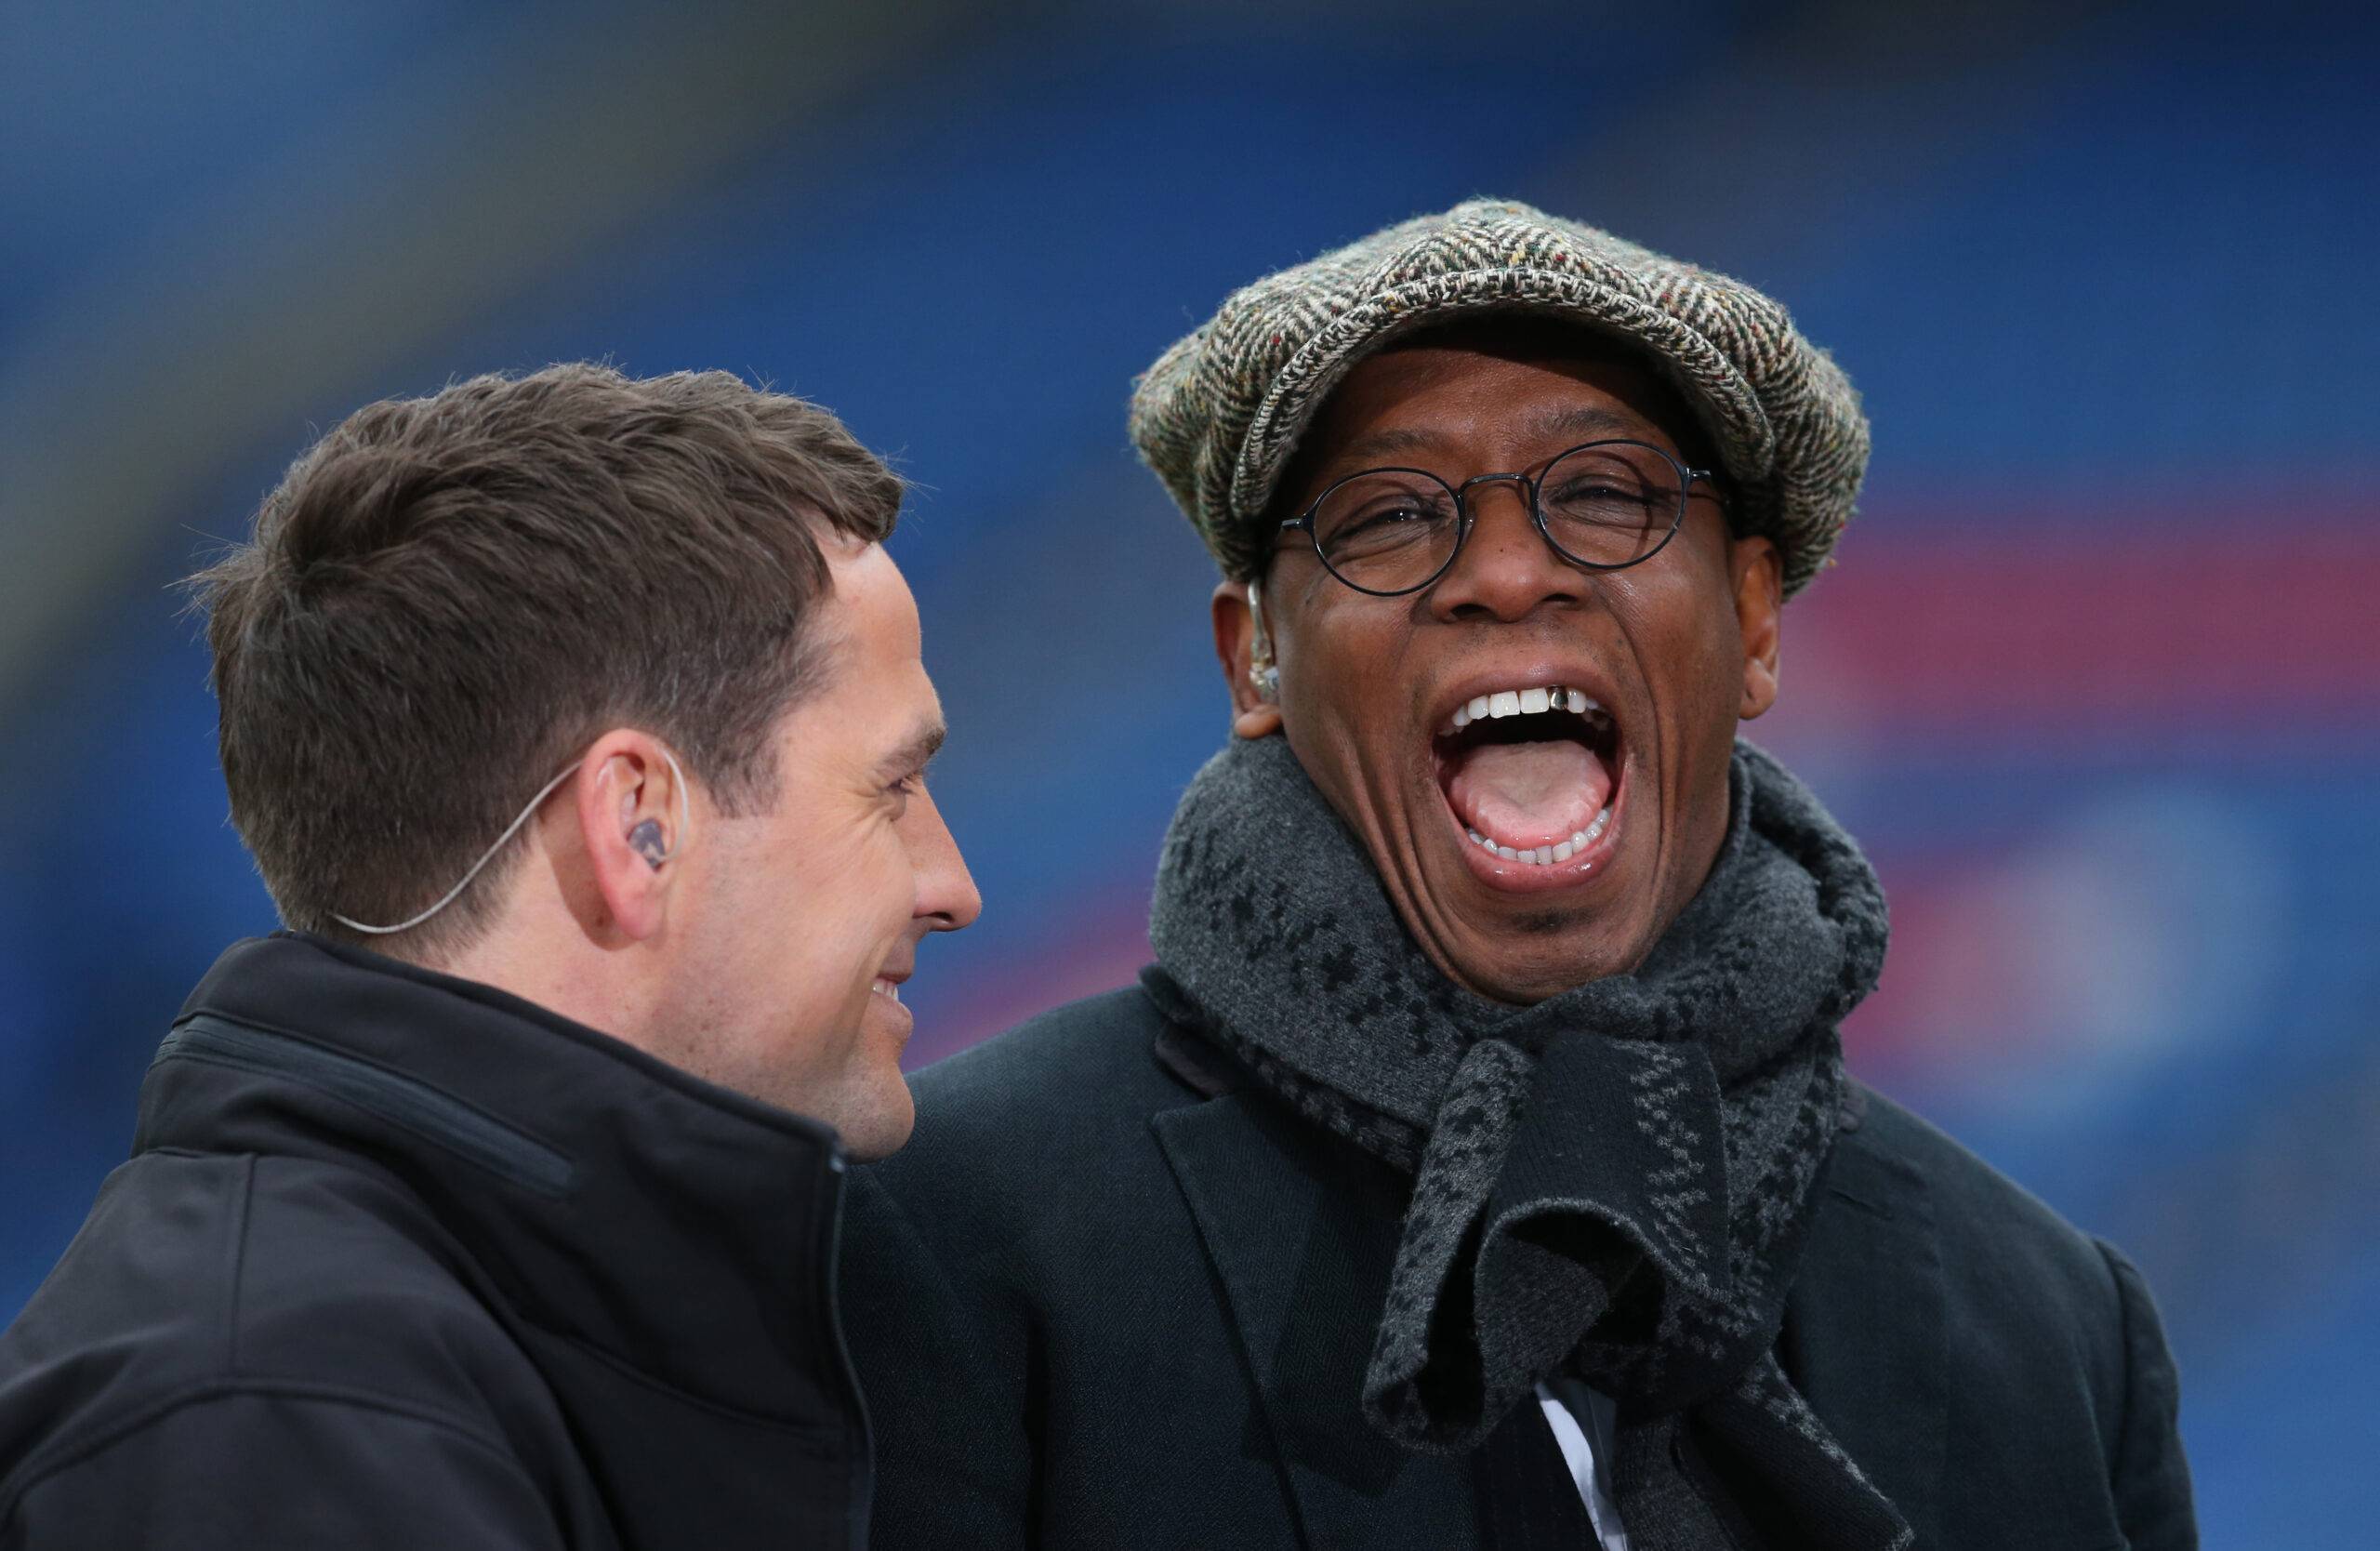 Ian Wright savaged Michael Owen and Chris Sutton in 2017